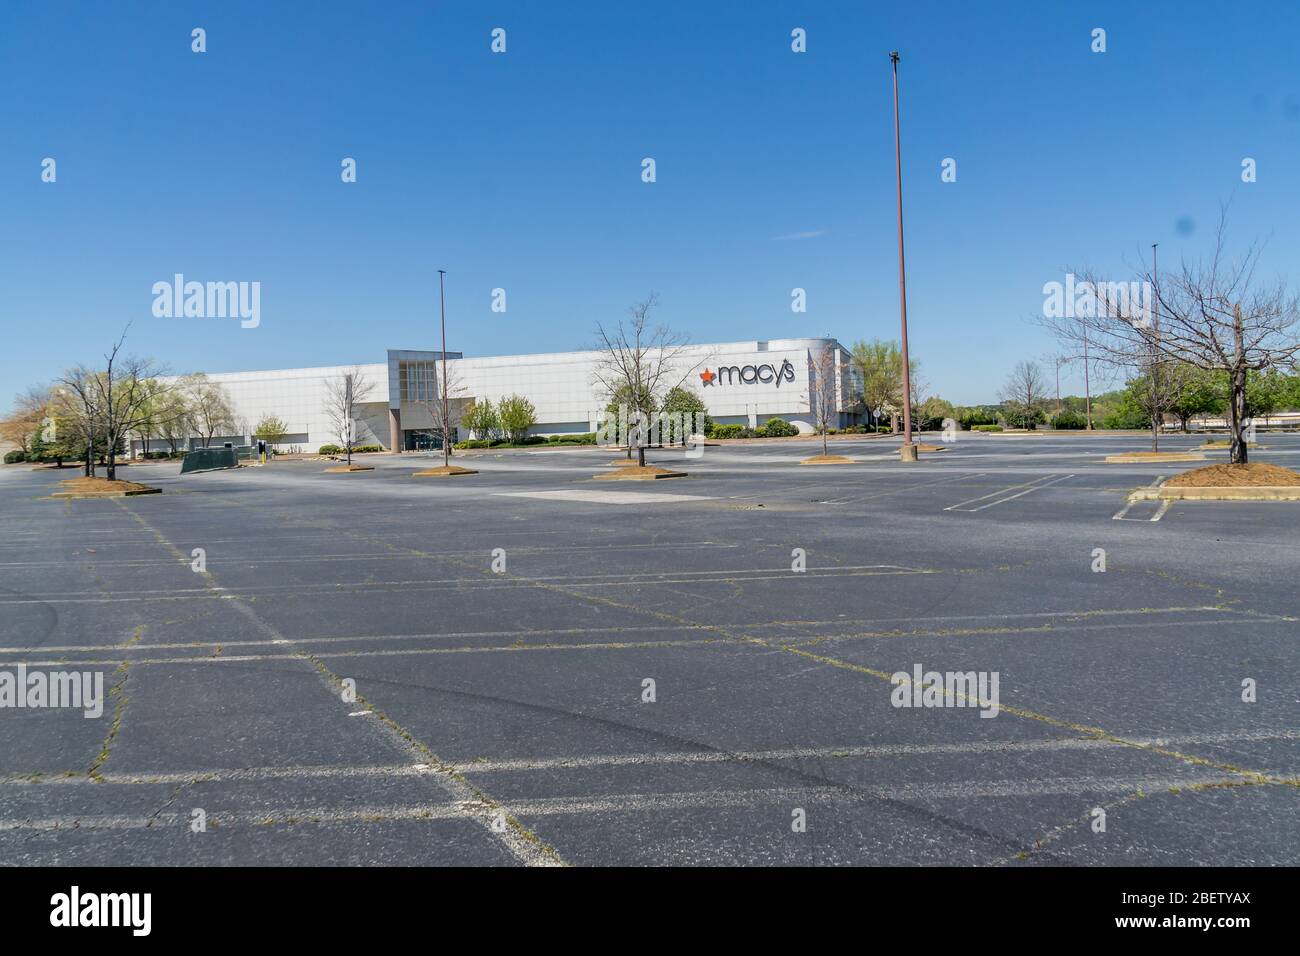 Kennesaw, GA / USA - 04/03/20: Macy's department store empty parking lots - shut down and furloughed employees at Cobb county Town Center mall - econo Stock Photo